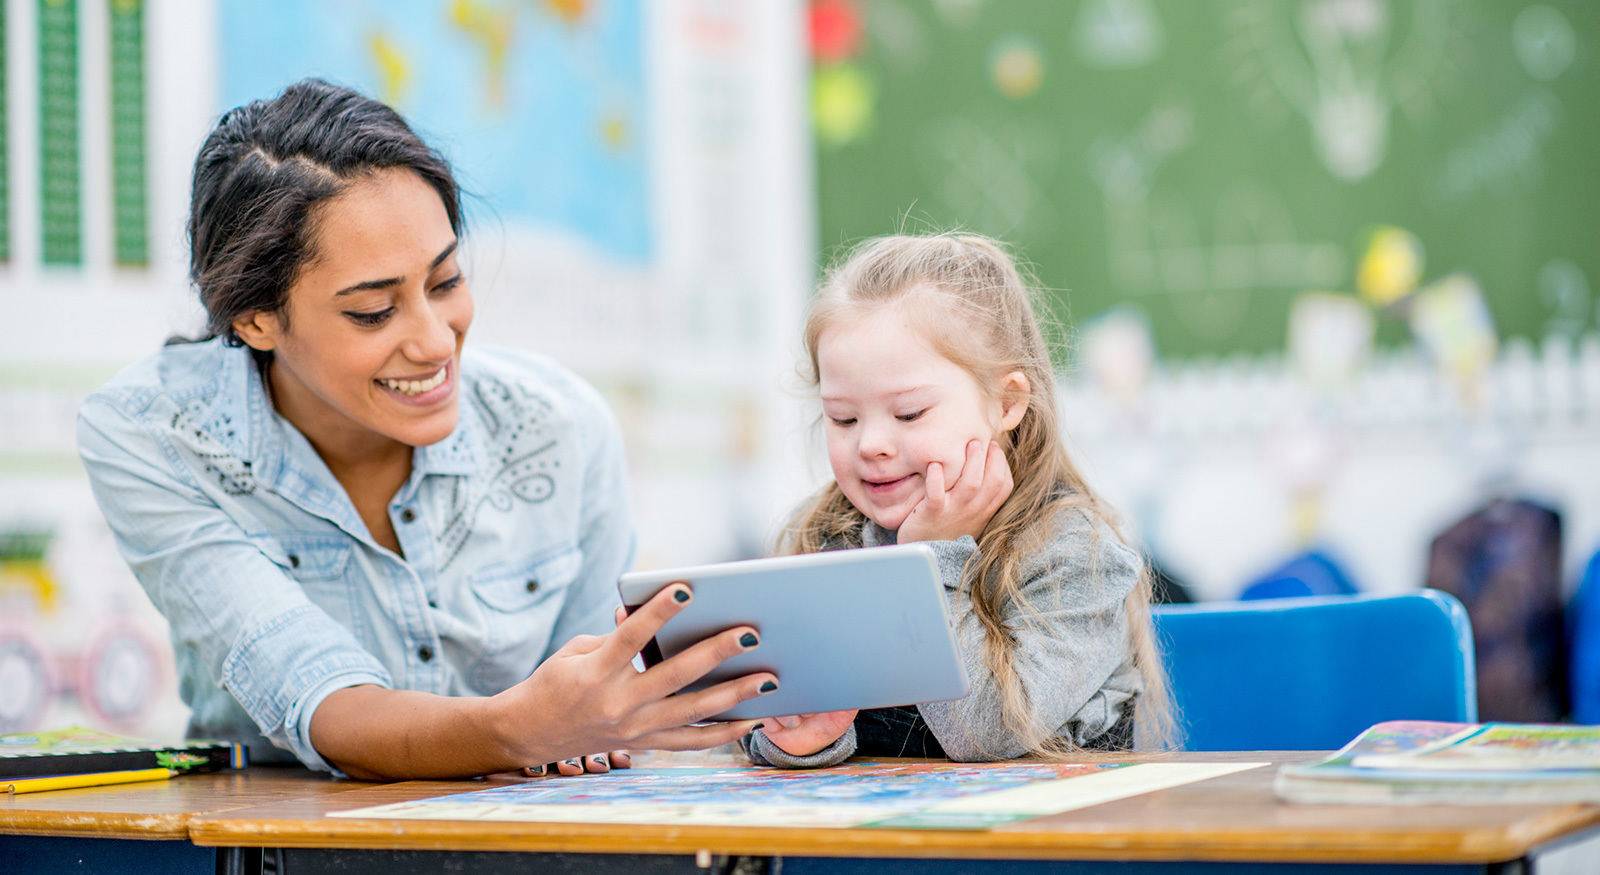 assistive technology in the classroom